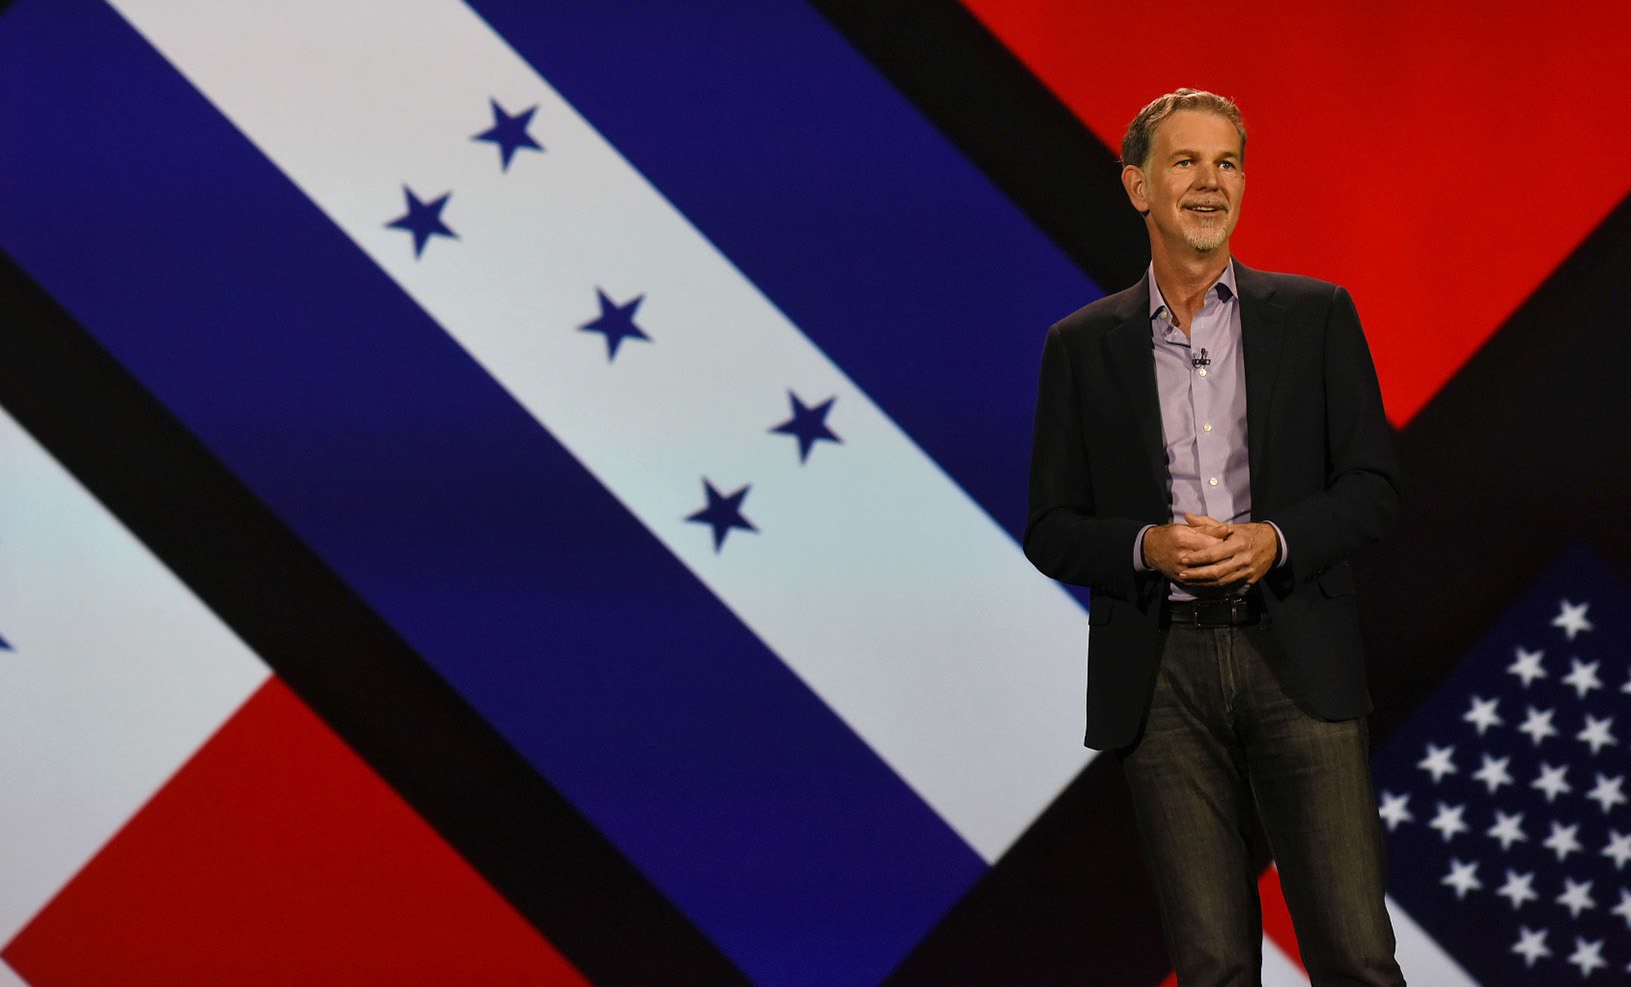 Reed Hastings, chairman, president and CEO of Netflix, speaks during an event at the 2016 Consumer Electronics Show in Las Vegas, on Jan. 6.
